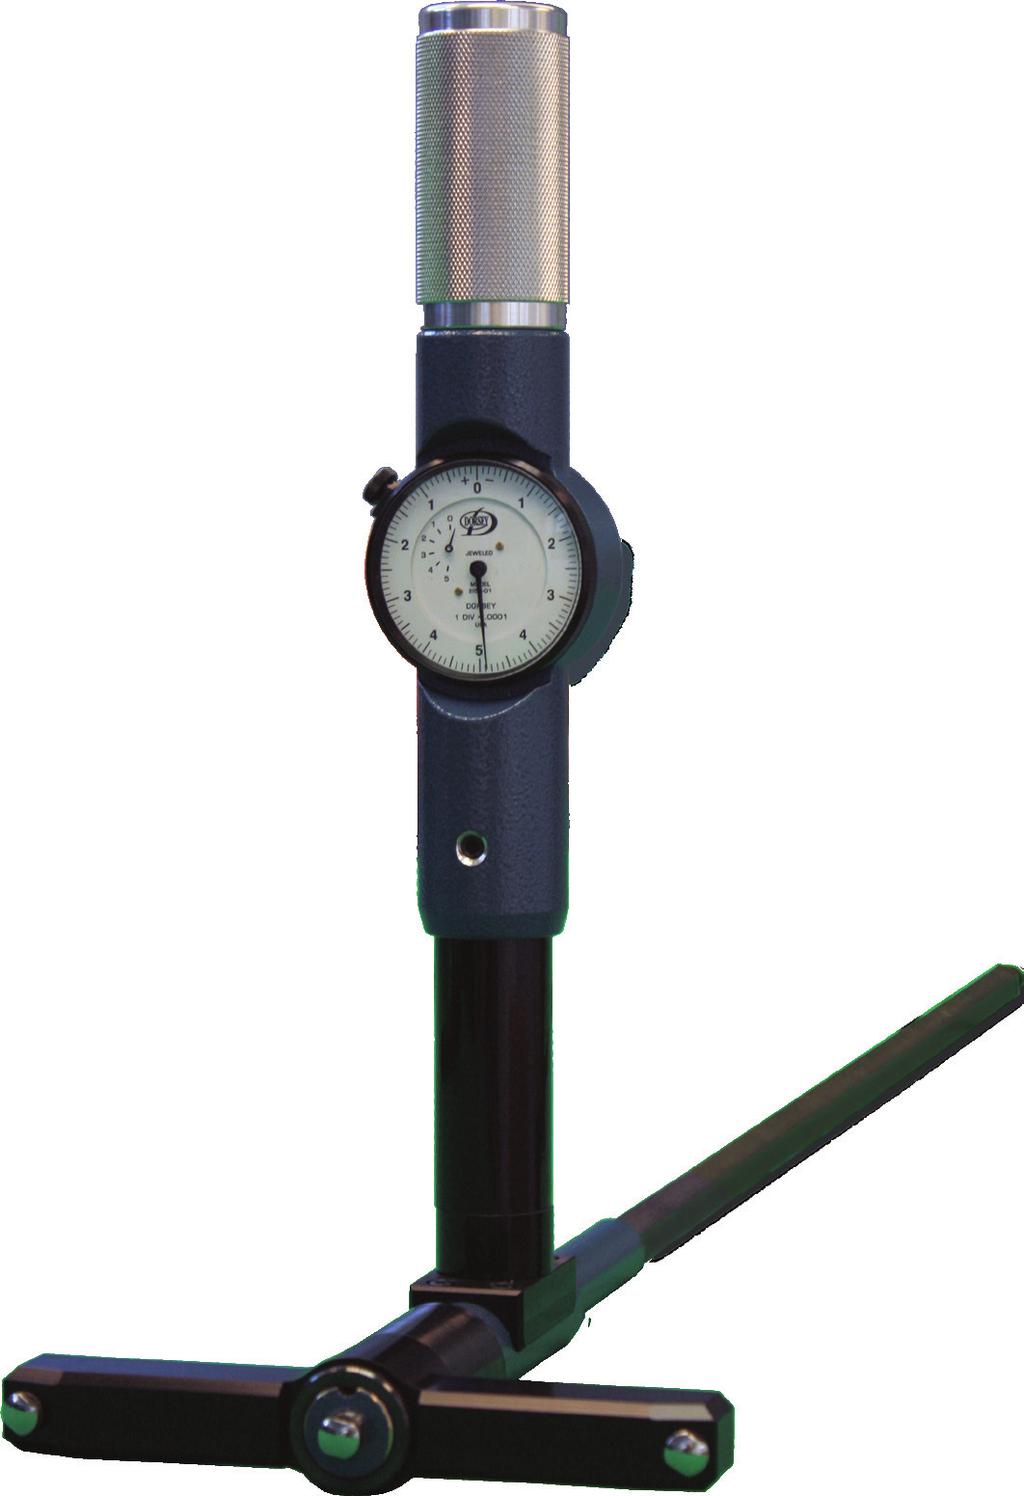 Dorsey Standard Large Bore Gages A time proven design expanded to measure large bore sizes Style 1- Both models utilize the same robust 1